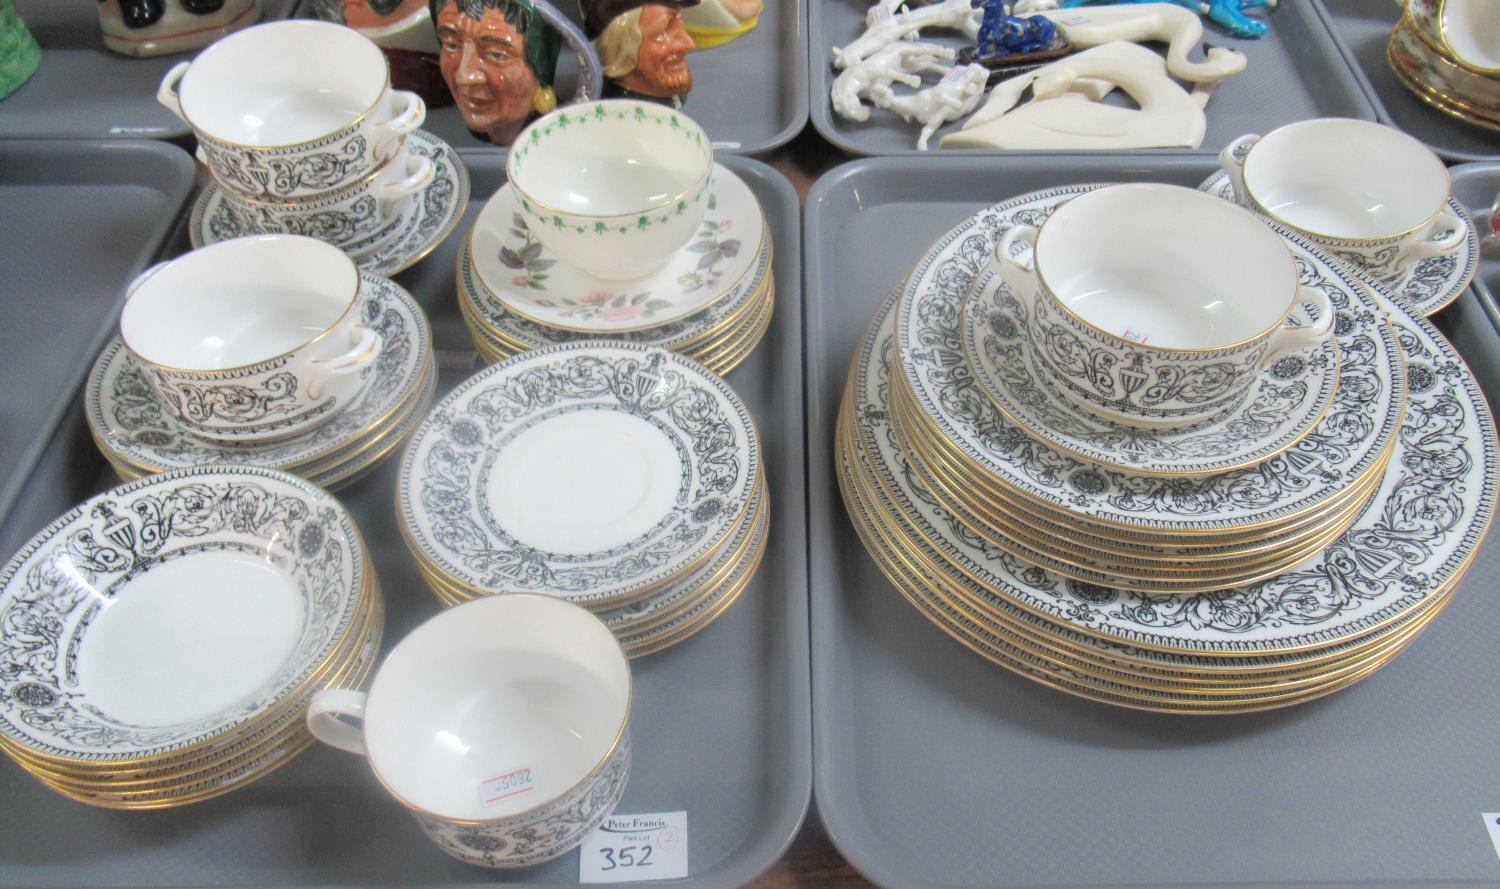 2 trays of Royal Worcester 'Padua' part dinner ware to include: 6 dinner plates, 6 side plates, 5